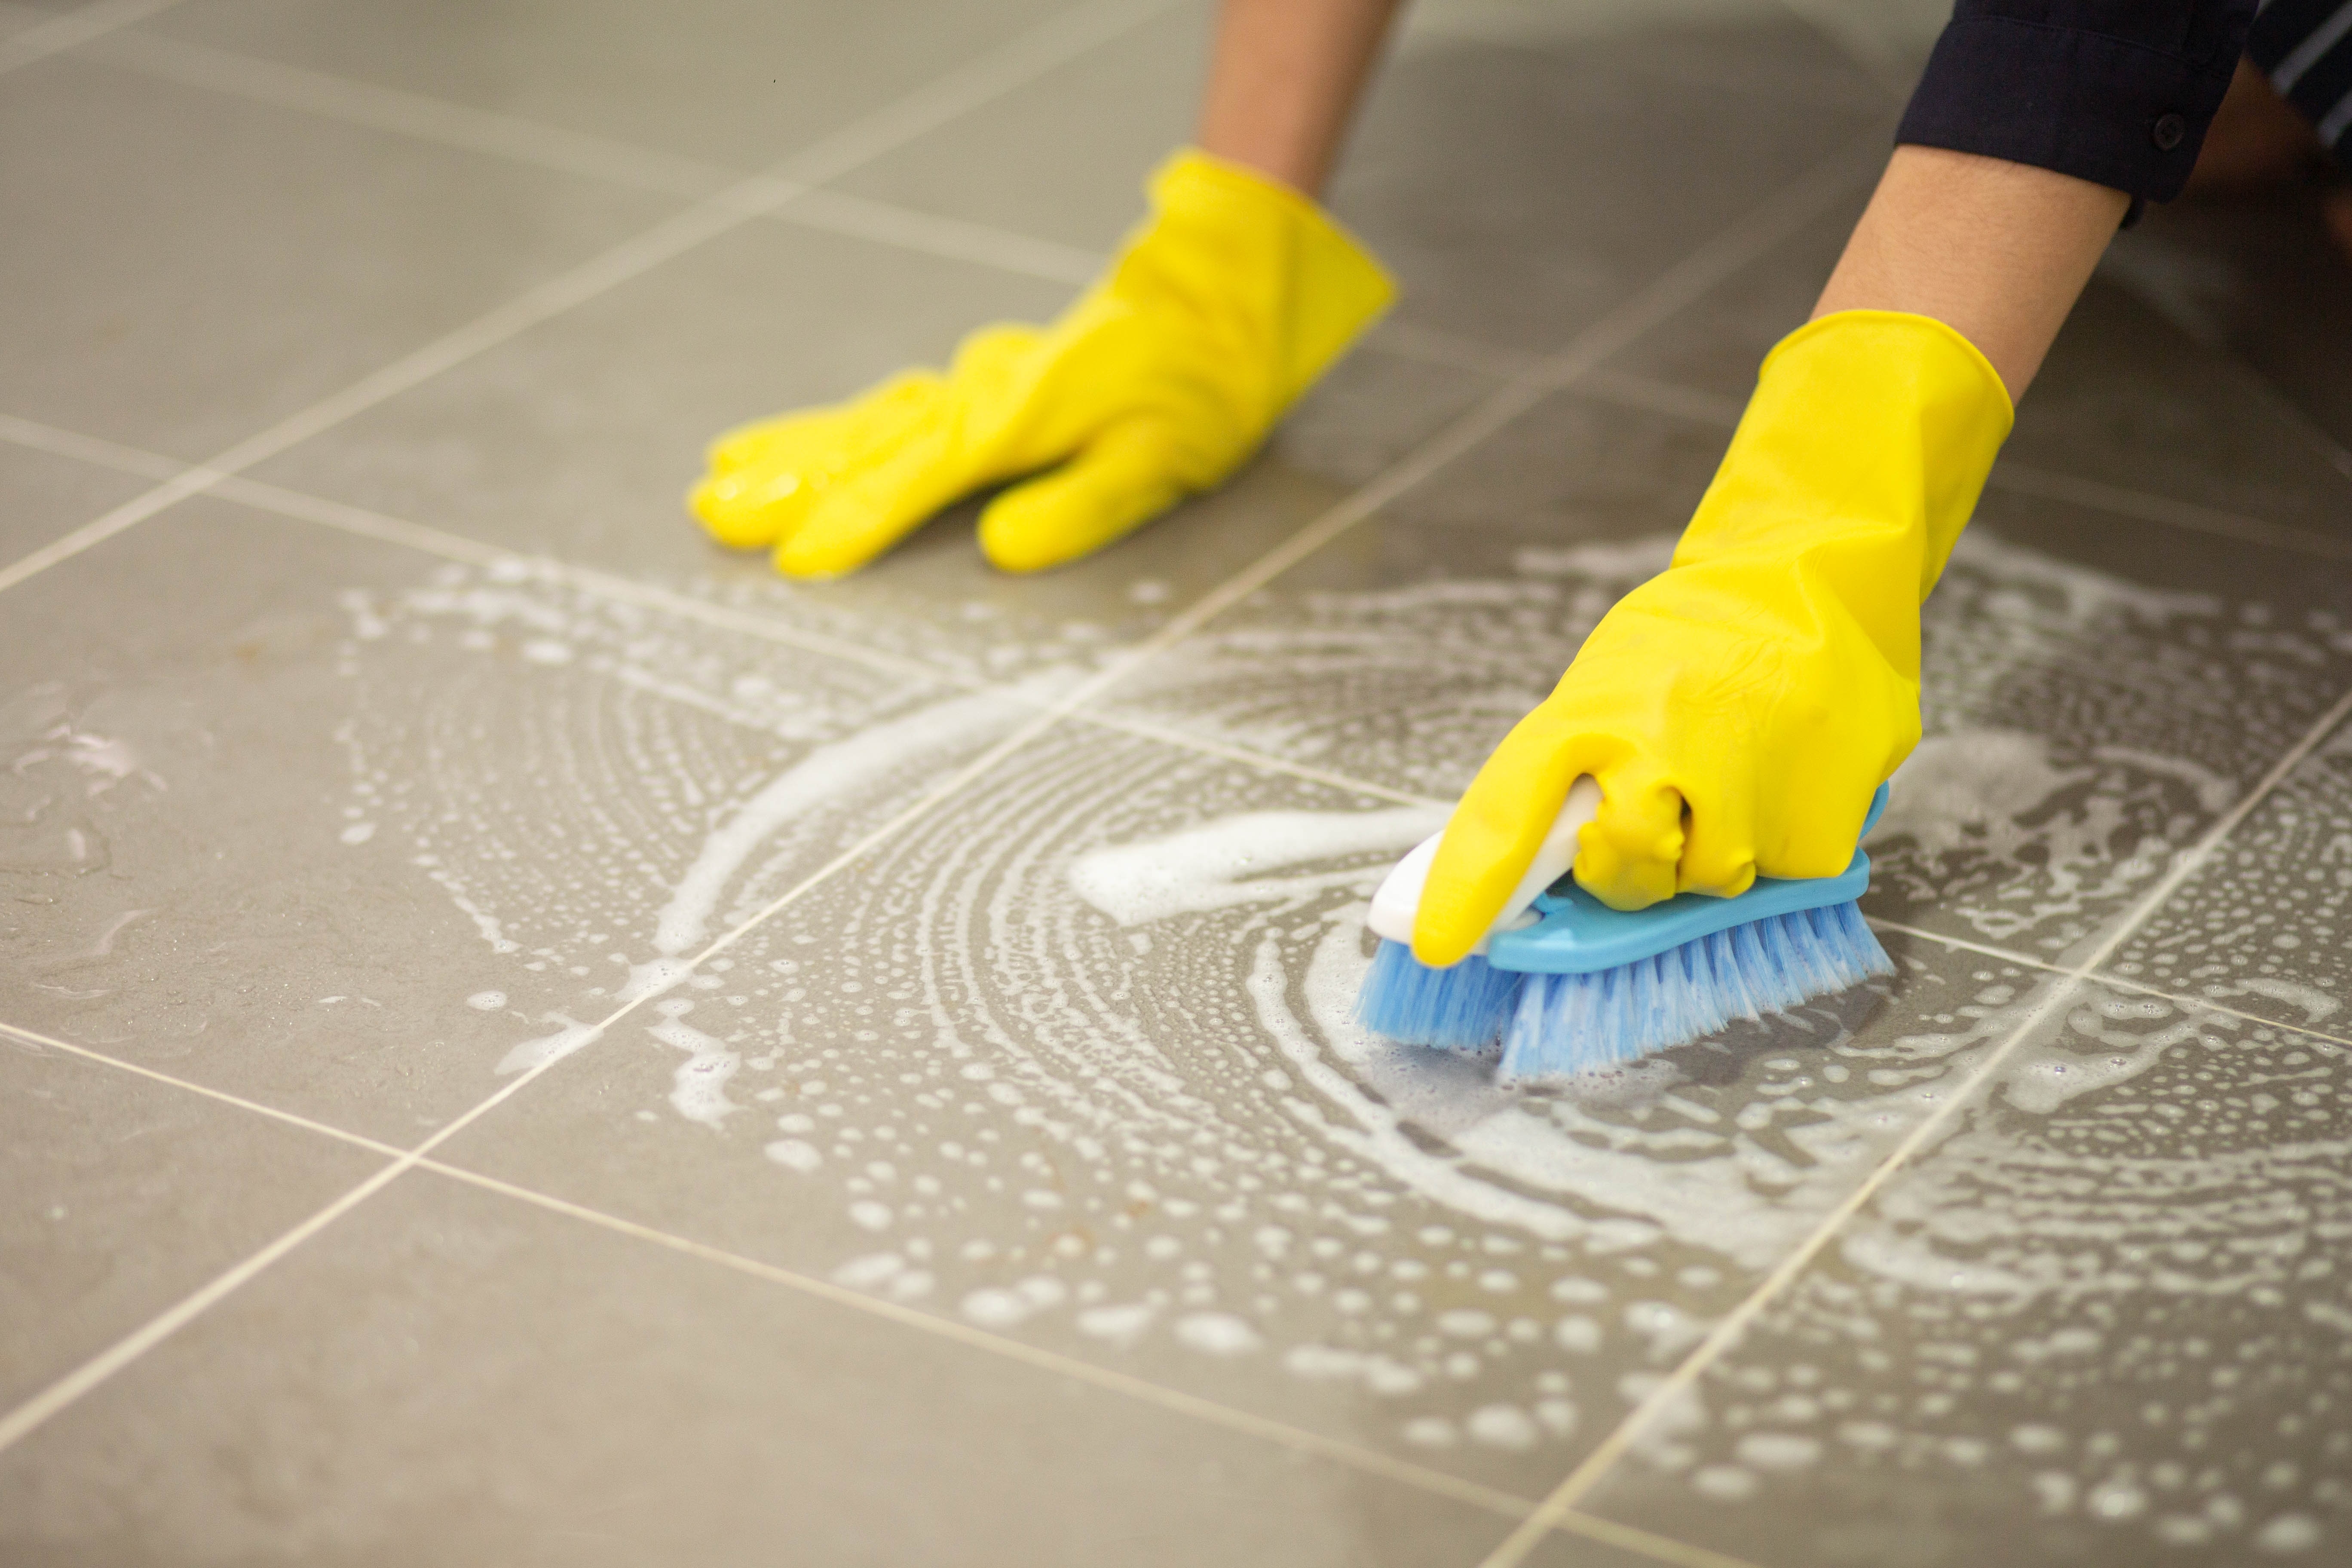 Scrub the localized stains | Source: Shutterstock